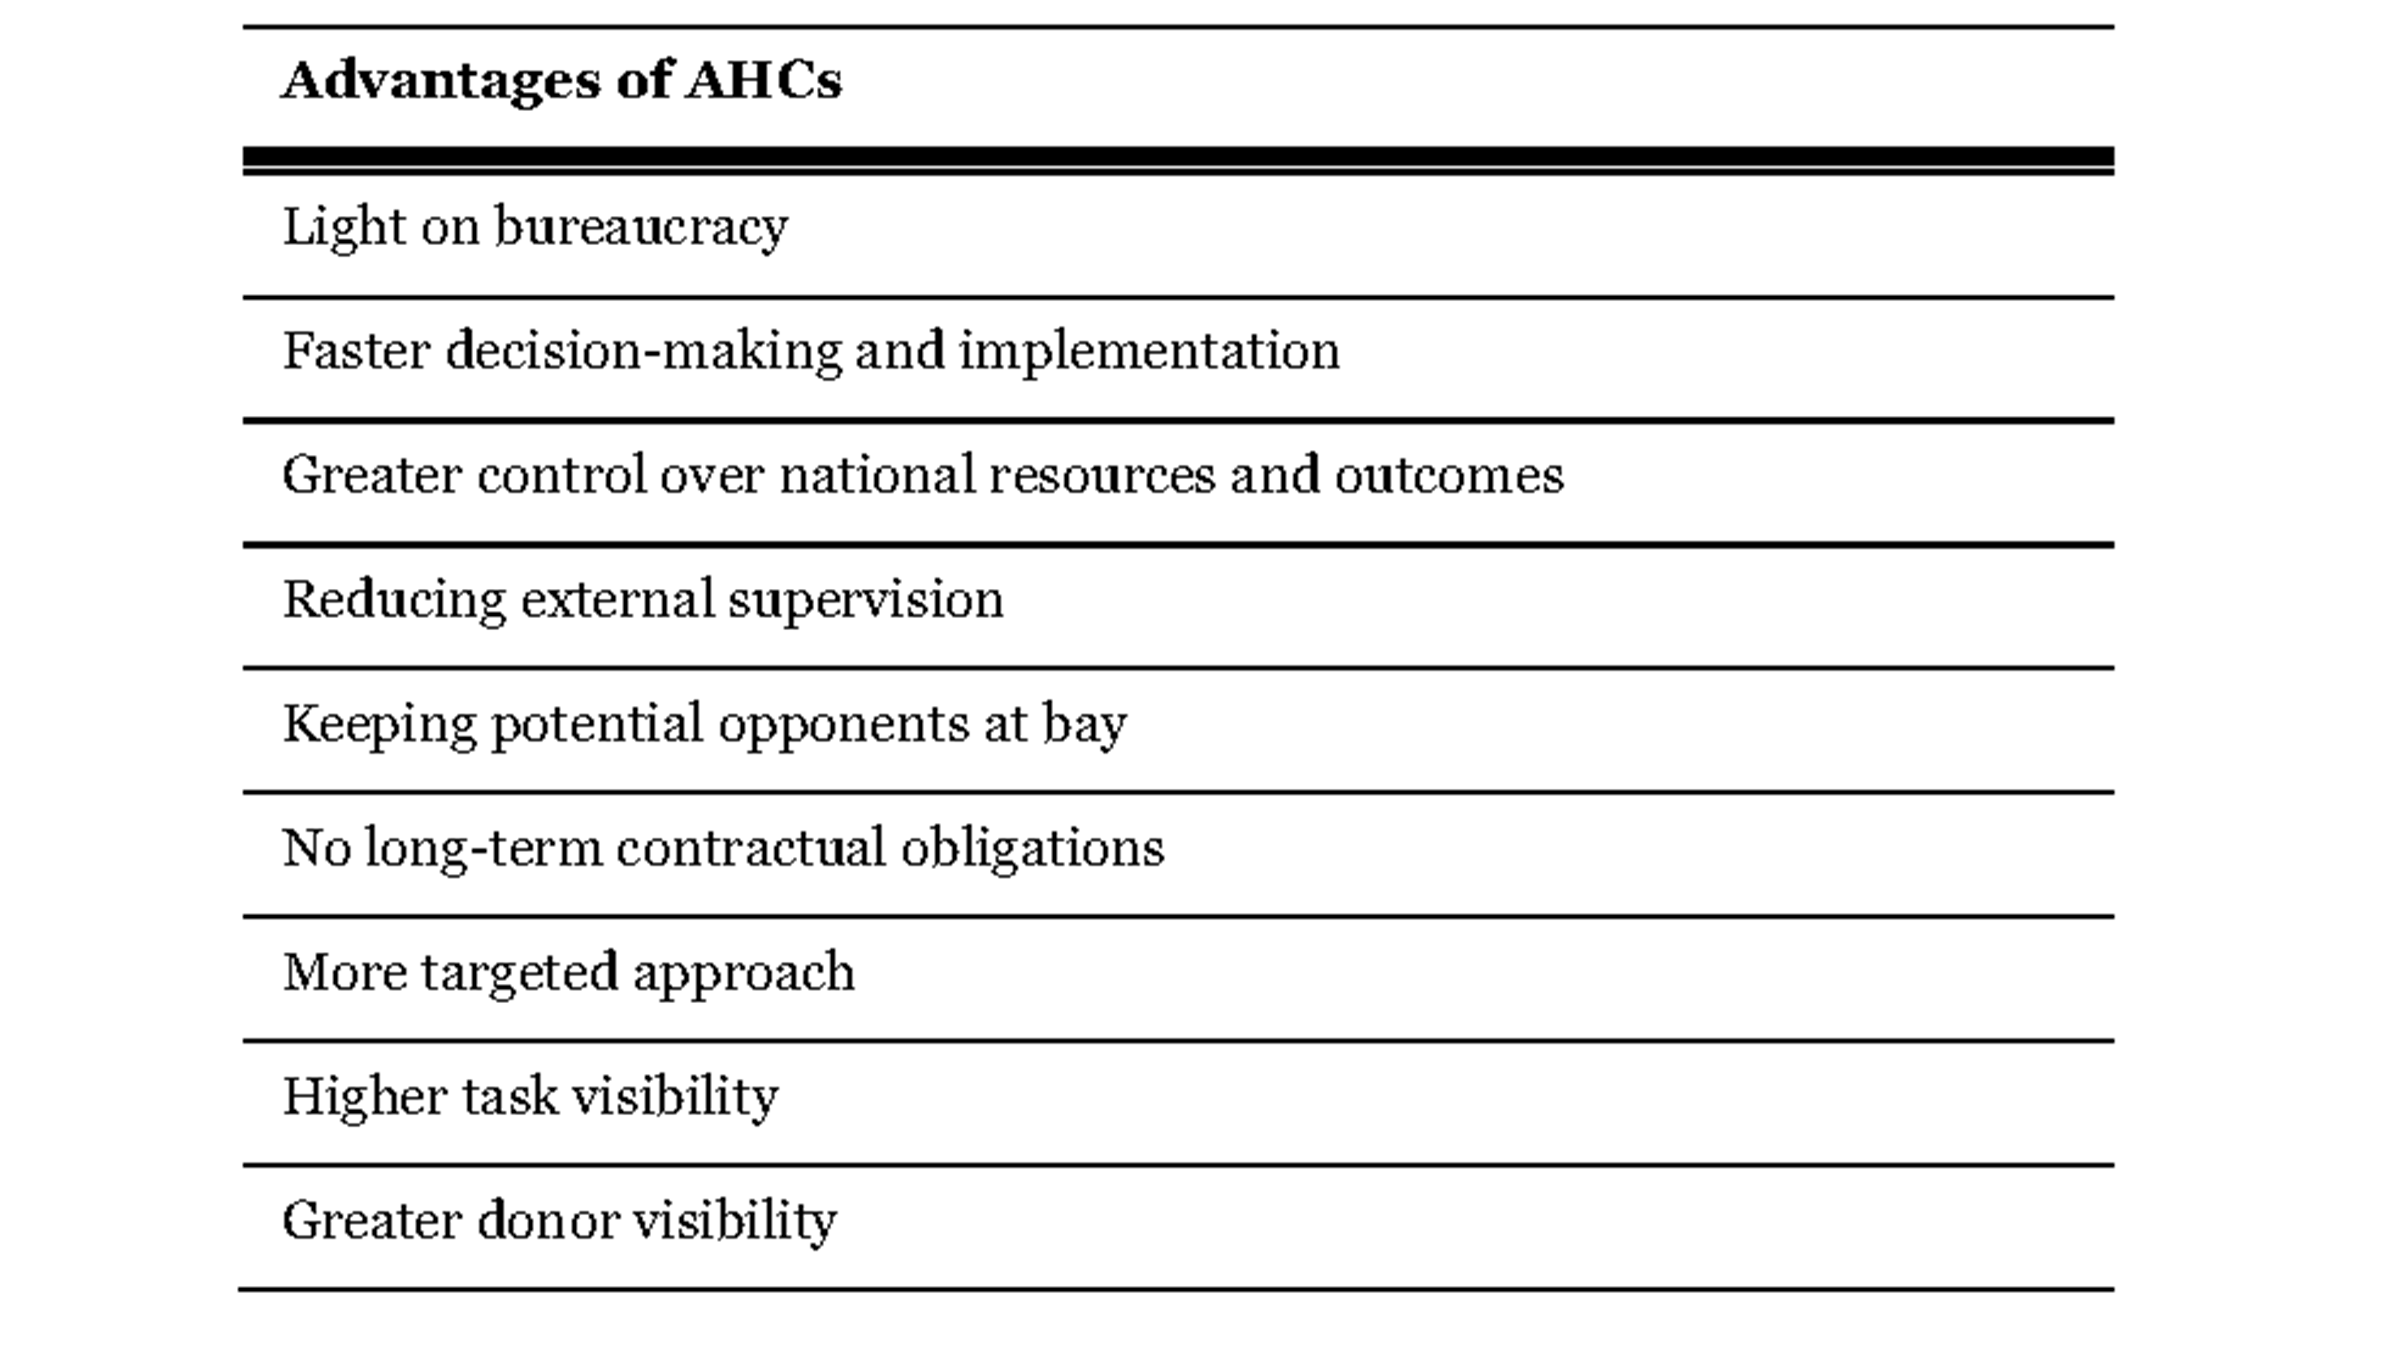 List showing Advantages of AHCs from the State Perspective